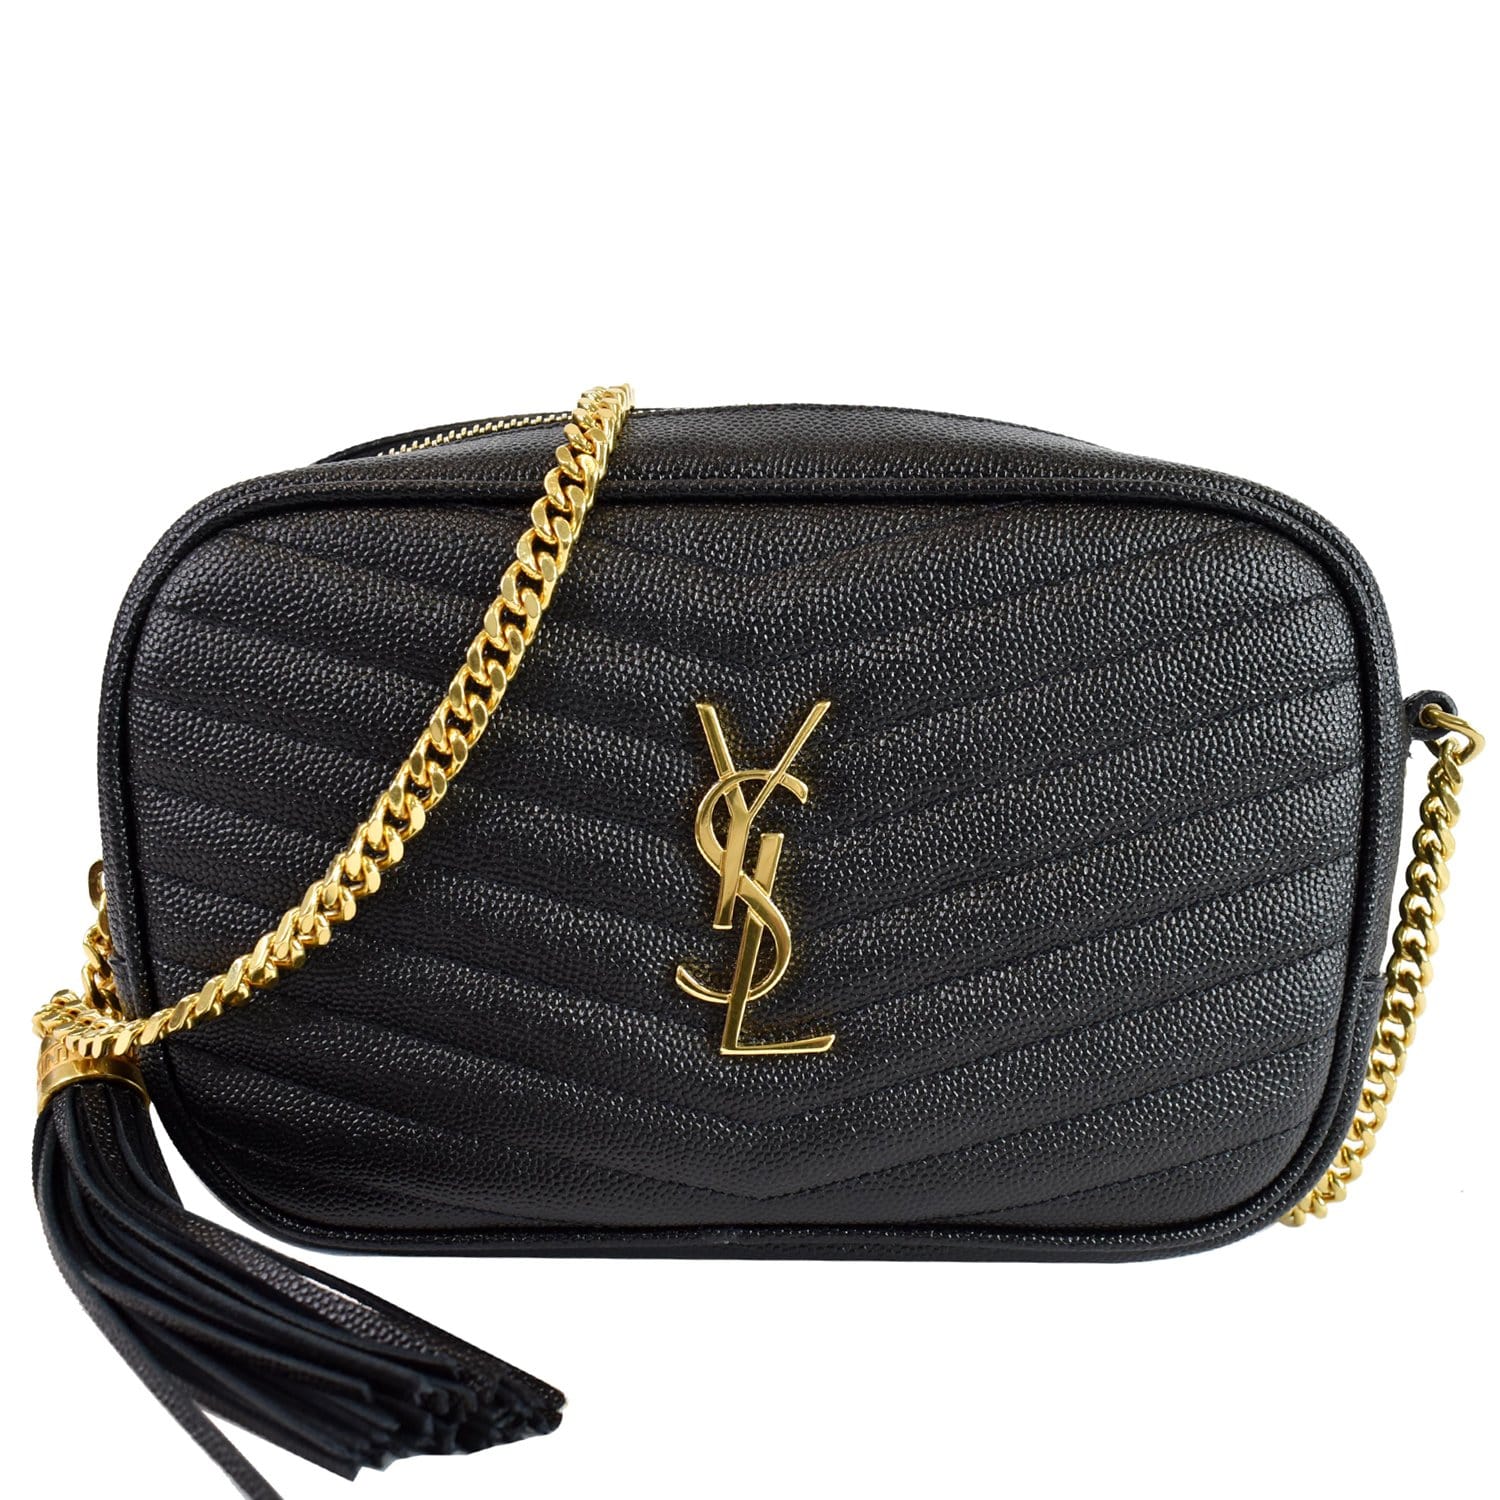 Yves Saint Laurent Mini Lou Quilted Leather Camera Bag in Black, Women's